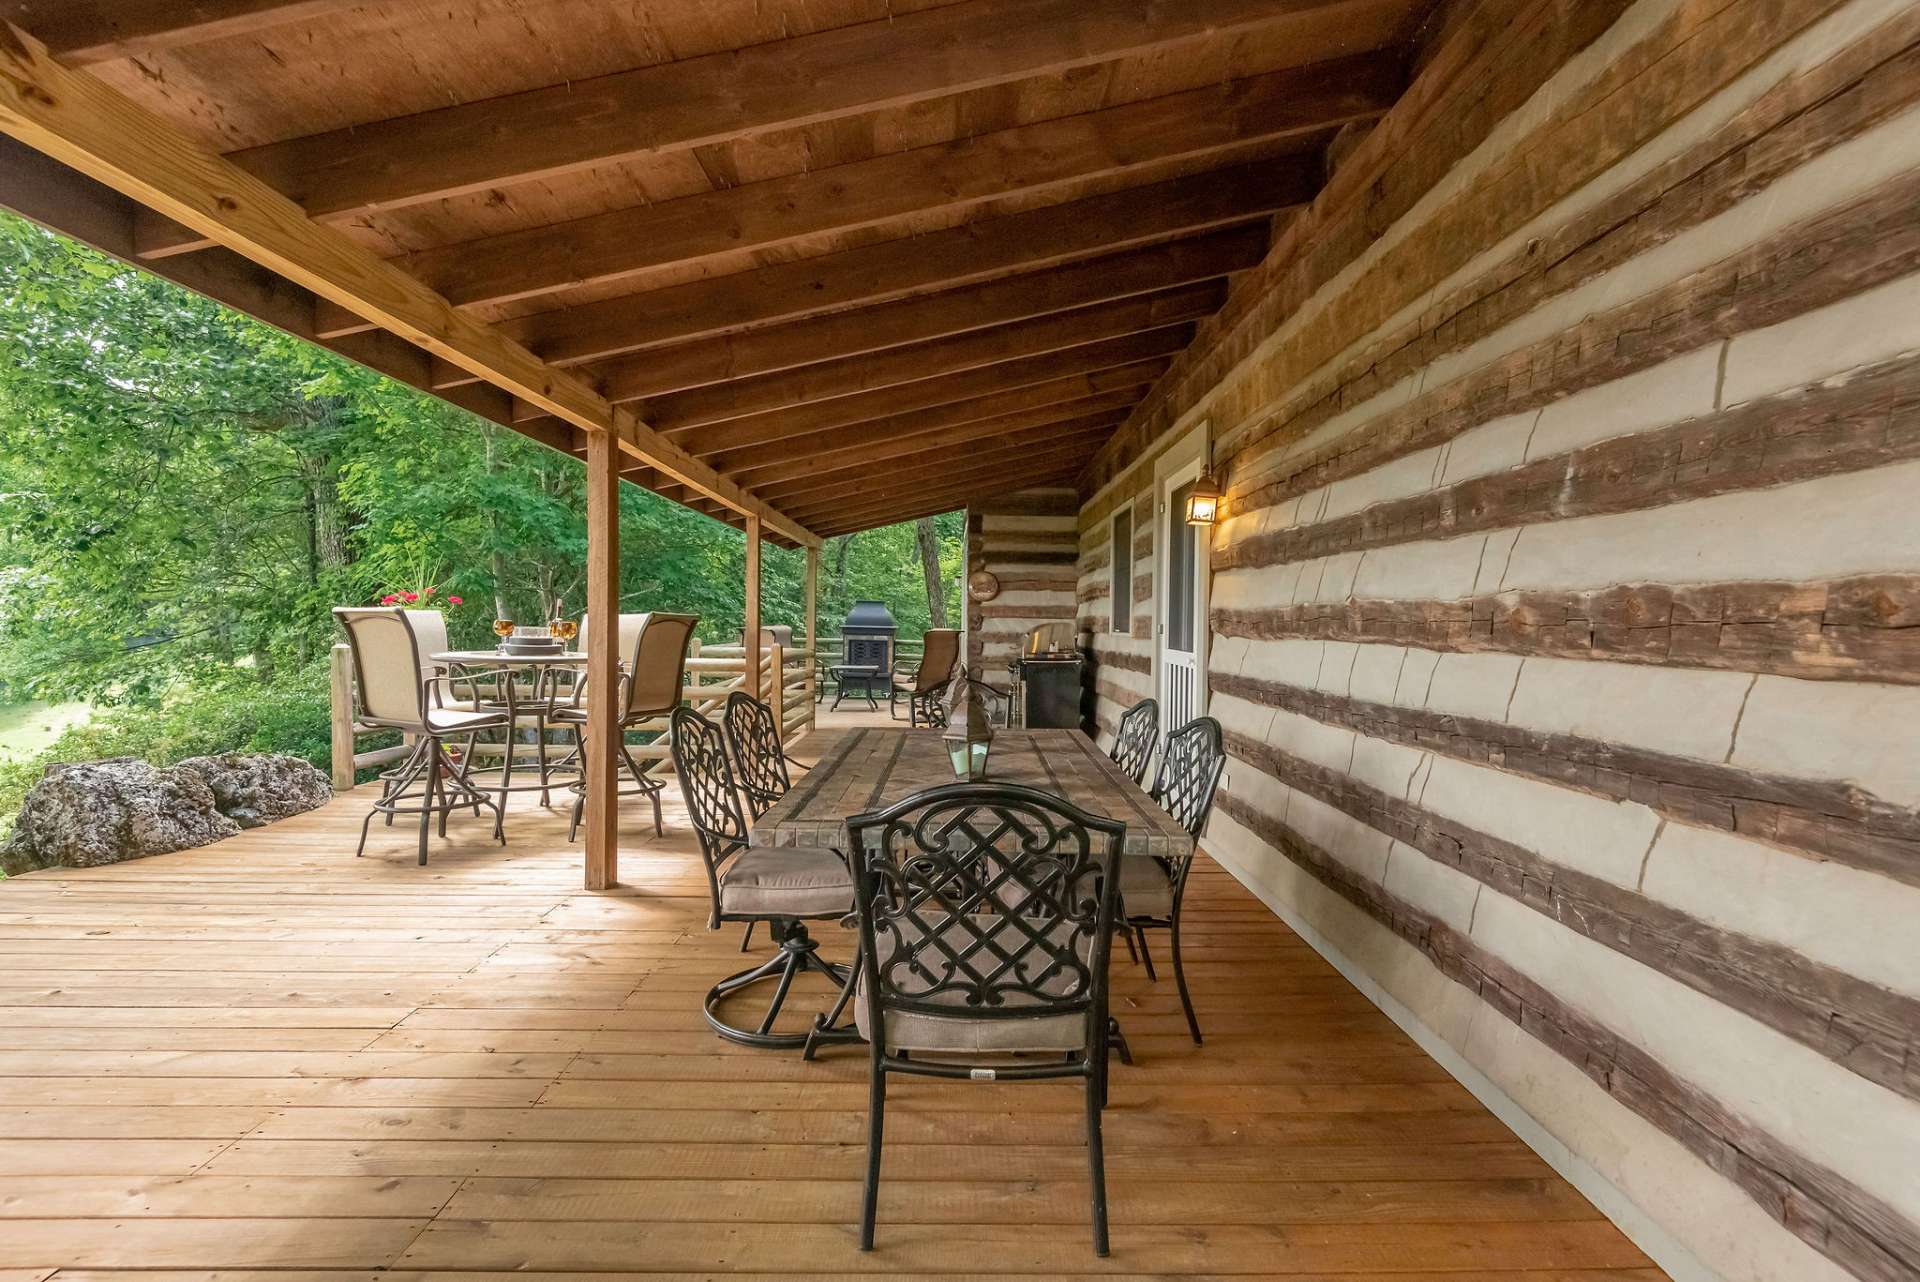 Back deck features both covered and open areas... you'll love the versatility of this outdoor living space!